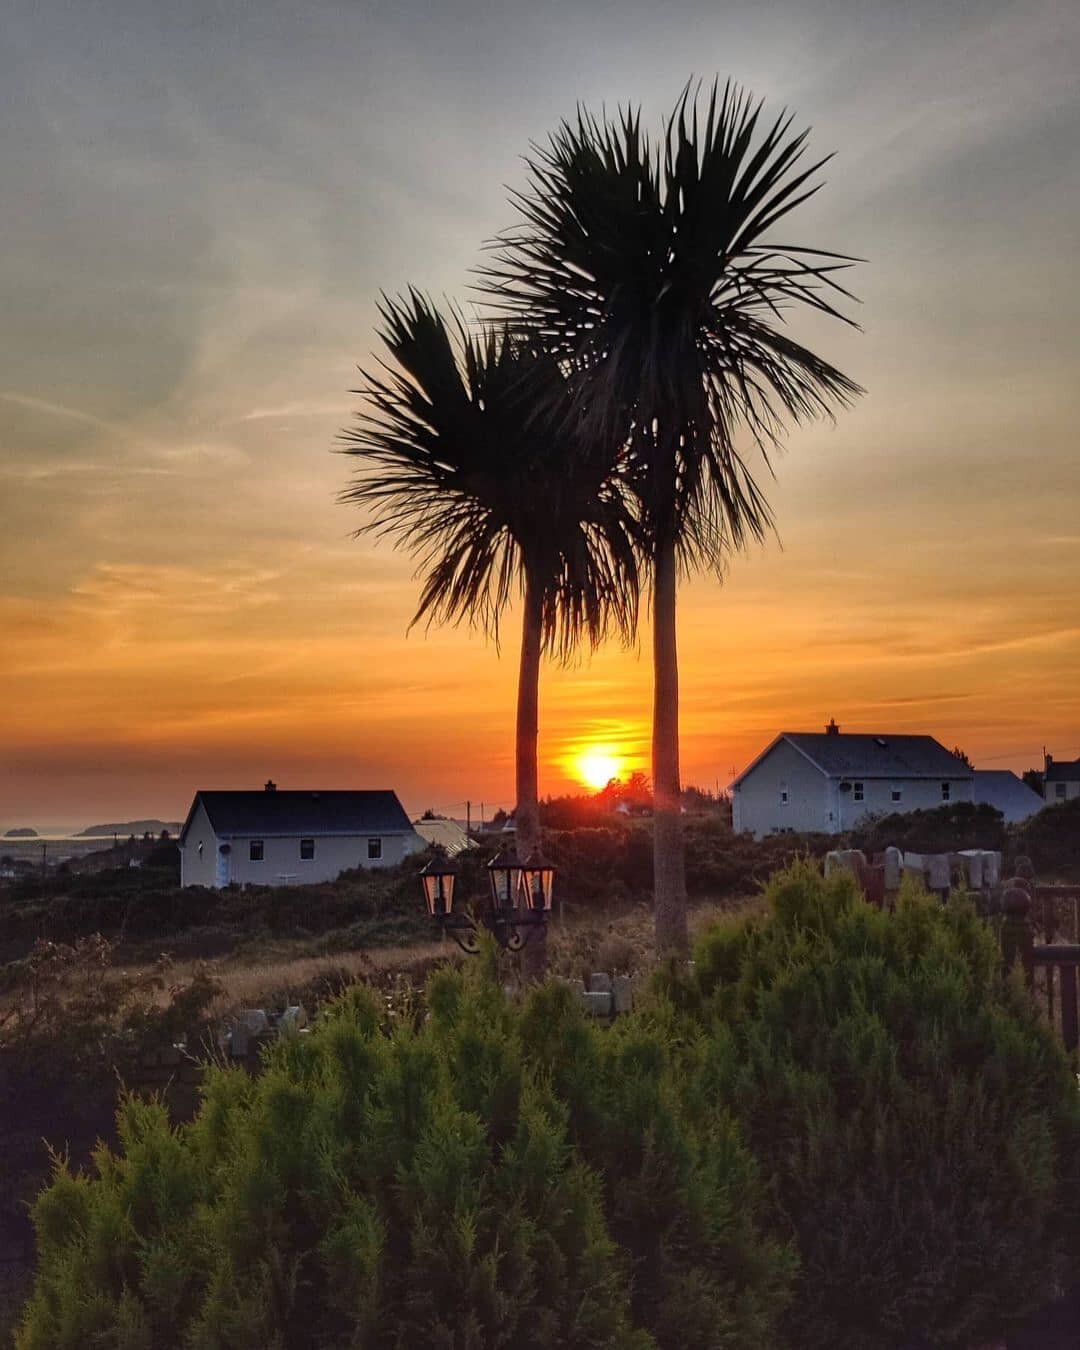 Sunset from Costa Del Donegal

Gaoth Dobhair 💚🤍.

📸 @michaeladonegan_
.

.#Repost @michaeladonegan_
#gweedore #gaothdobhair #gaeltacht #sunset #cloudscape #palmtrees #sunsetphotography #wildatlanticway #donegal #waw #donegalpage #wanderireland #di